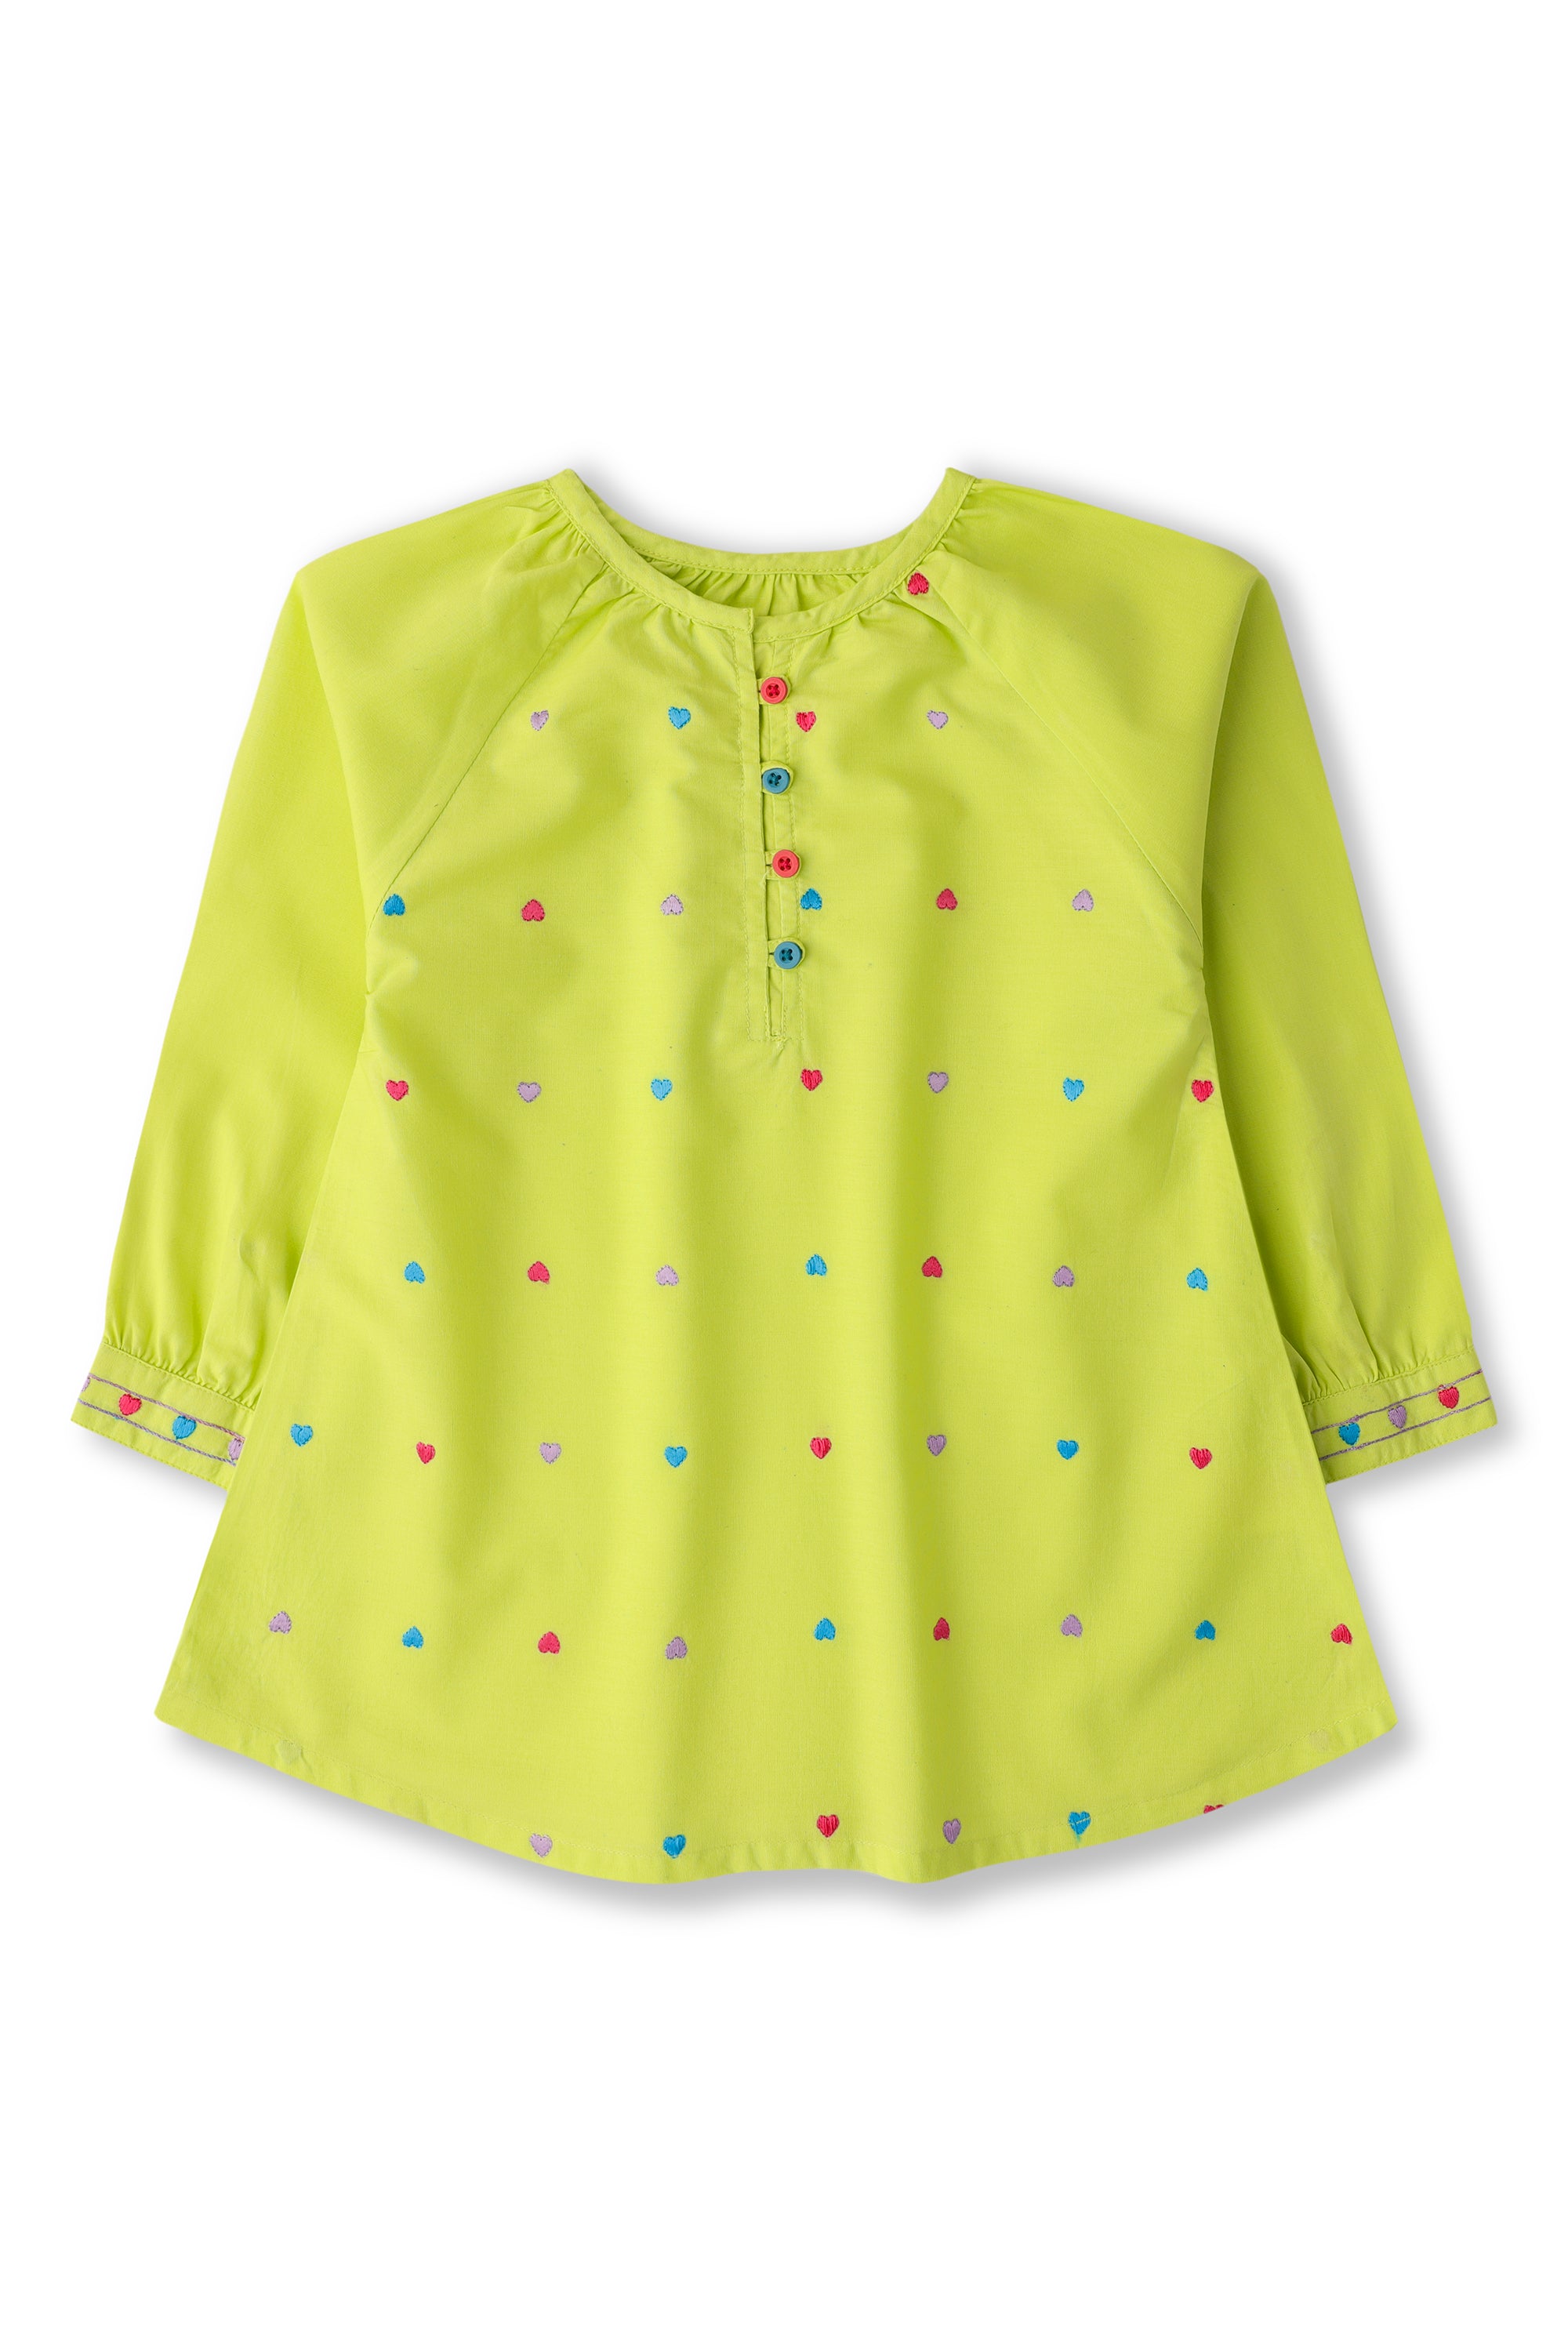 Girls Light Green Embroidered Top